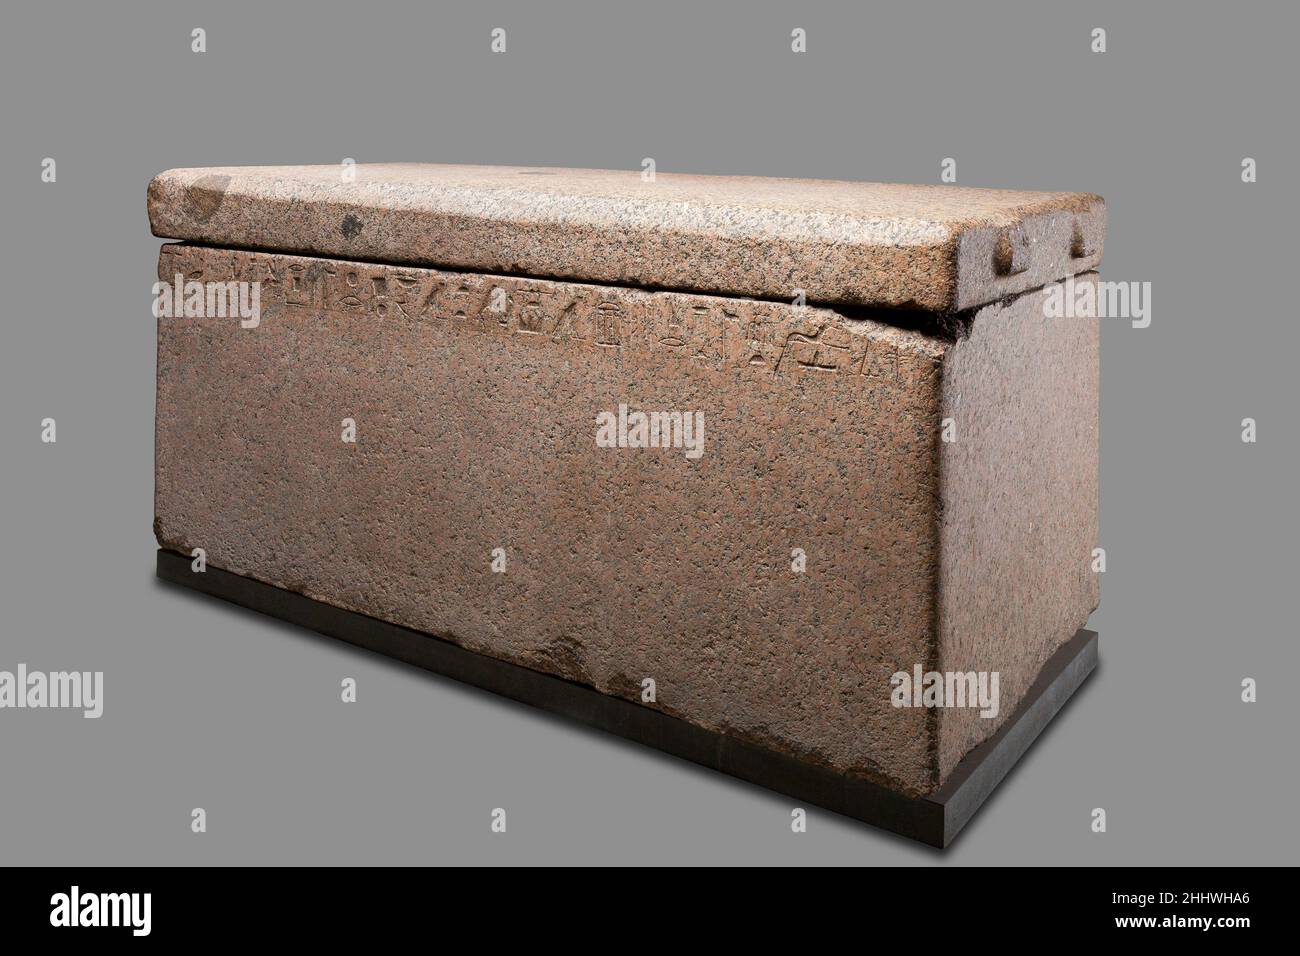 Sarcophagus of Mindjedef ca. 2520–2472 B.C. Old Kingdom Mindjedef, who lived during the mid- to late 4th Dynasty, was buried in a large tomb on the east side of Khufu's pyramid. This red granite sarcophagus was found in the badly disturbed burial chamber, with a dismembered skeleton laid on top of its lid. The outstretched body would have likely been placed directly inside this stone coffer, perhaps laid on his left side and wrapped in linen covered with a layer of plaster in which his limbs and face would have been molded, as was the practice for the elite during this period. The lugs on the Stock Photo